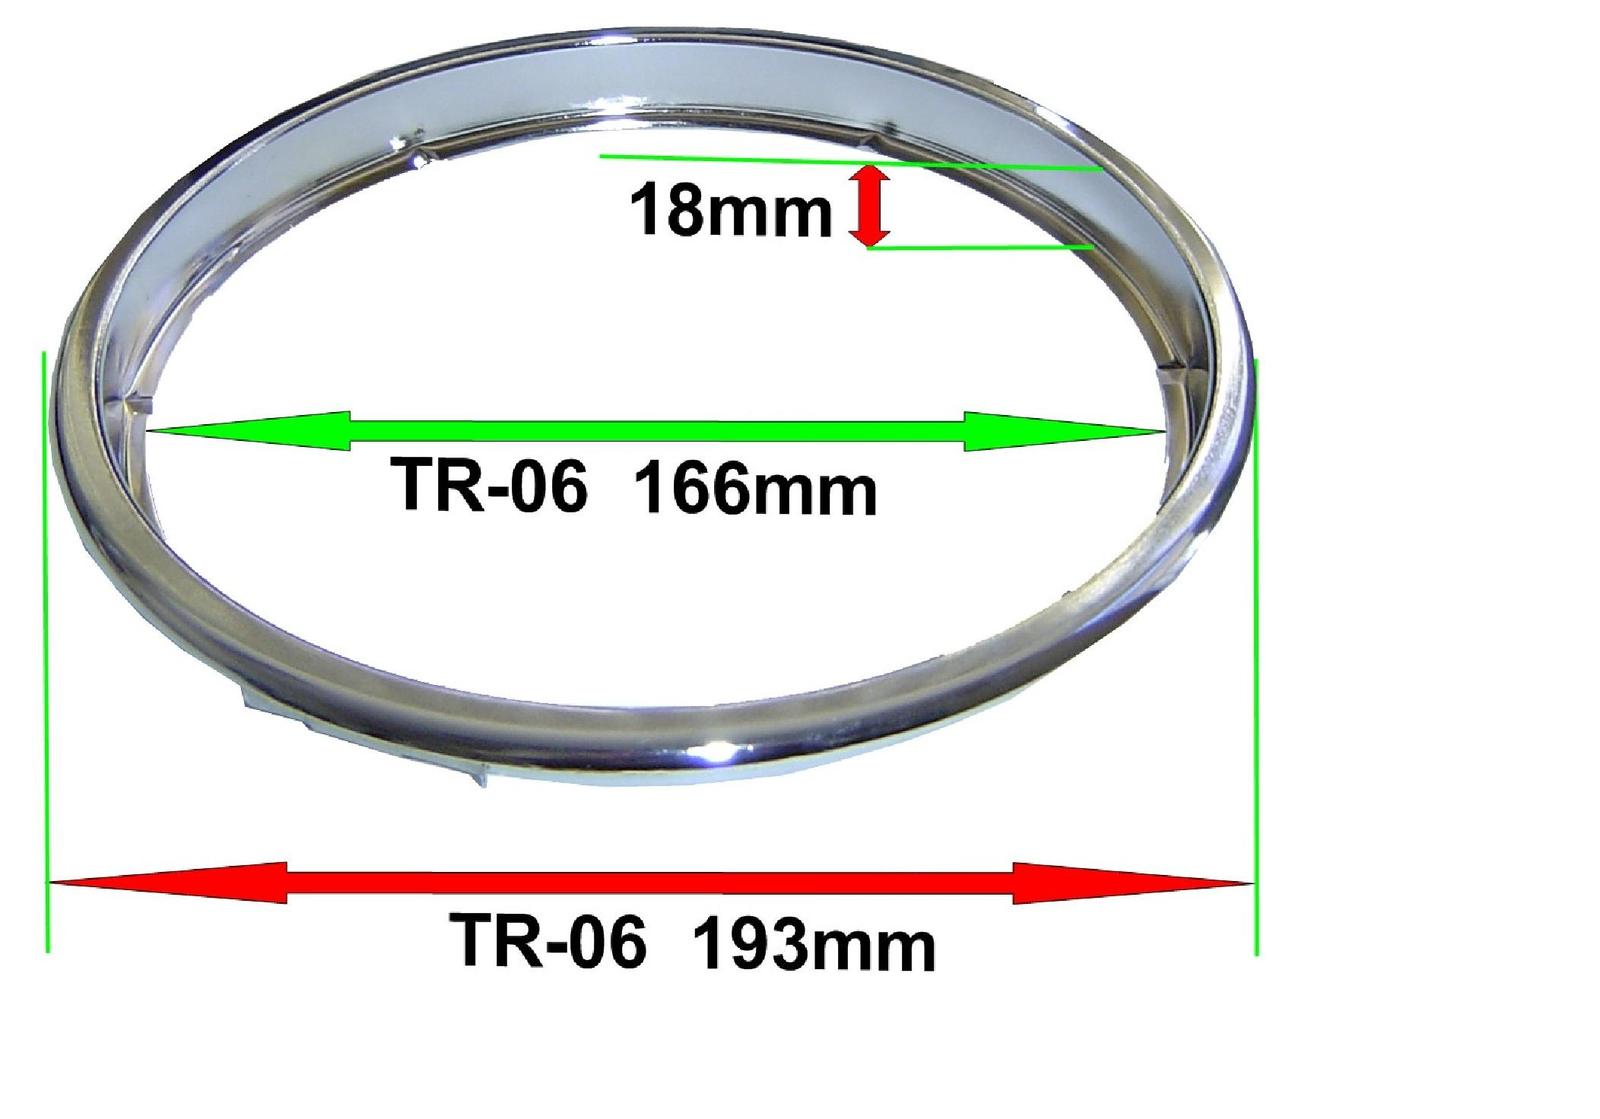 Trim Ring | TR-06 / 1889-06 / 3523-09 | Suits HP-04 main image